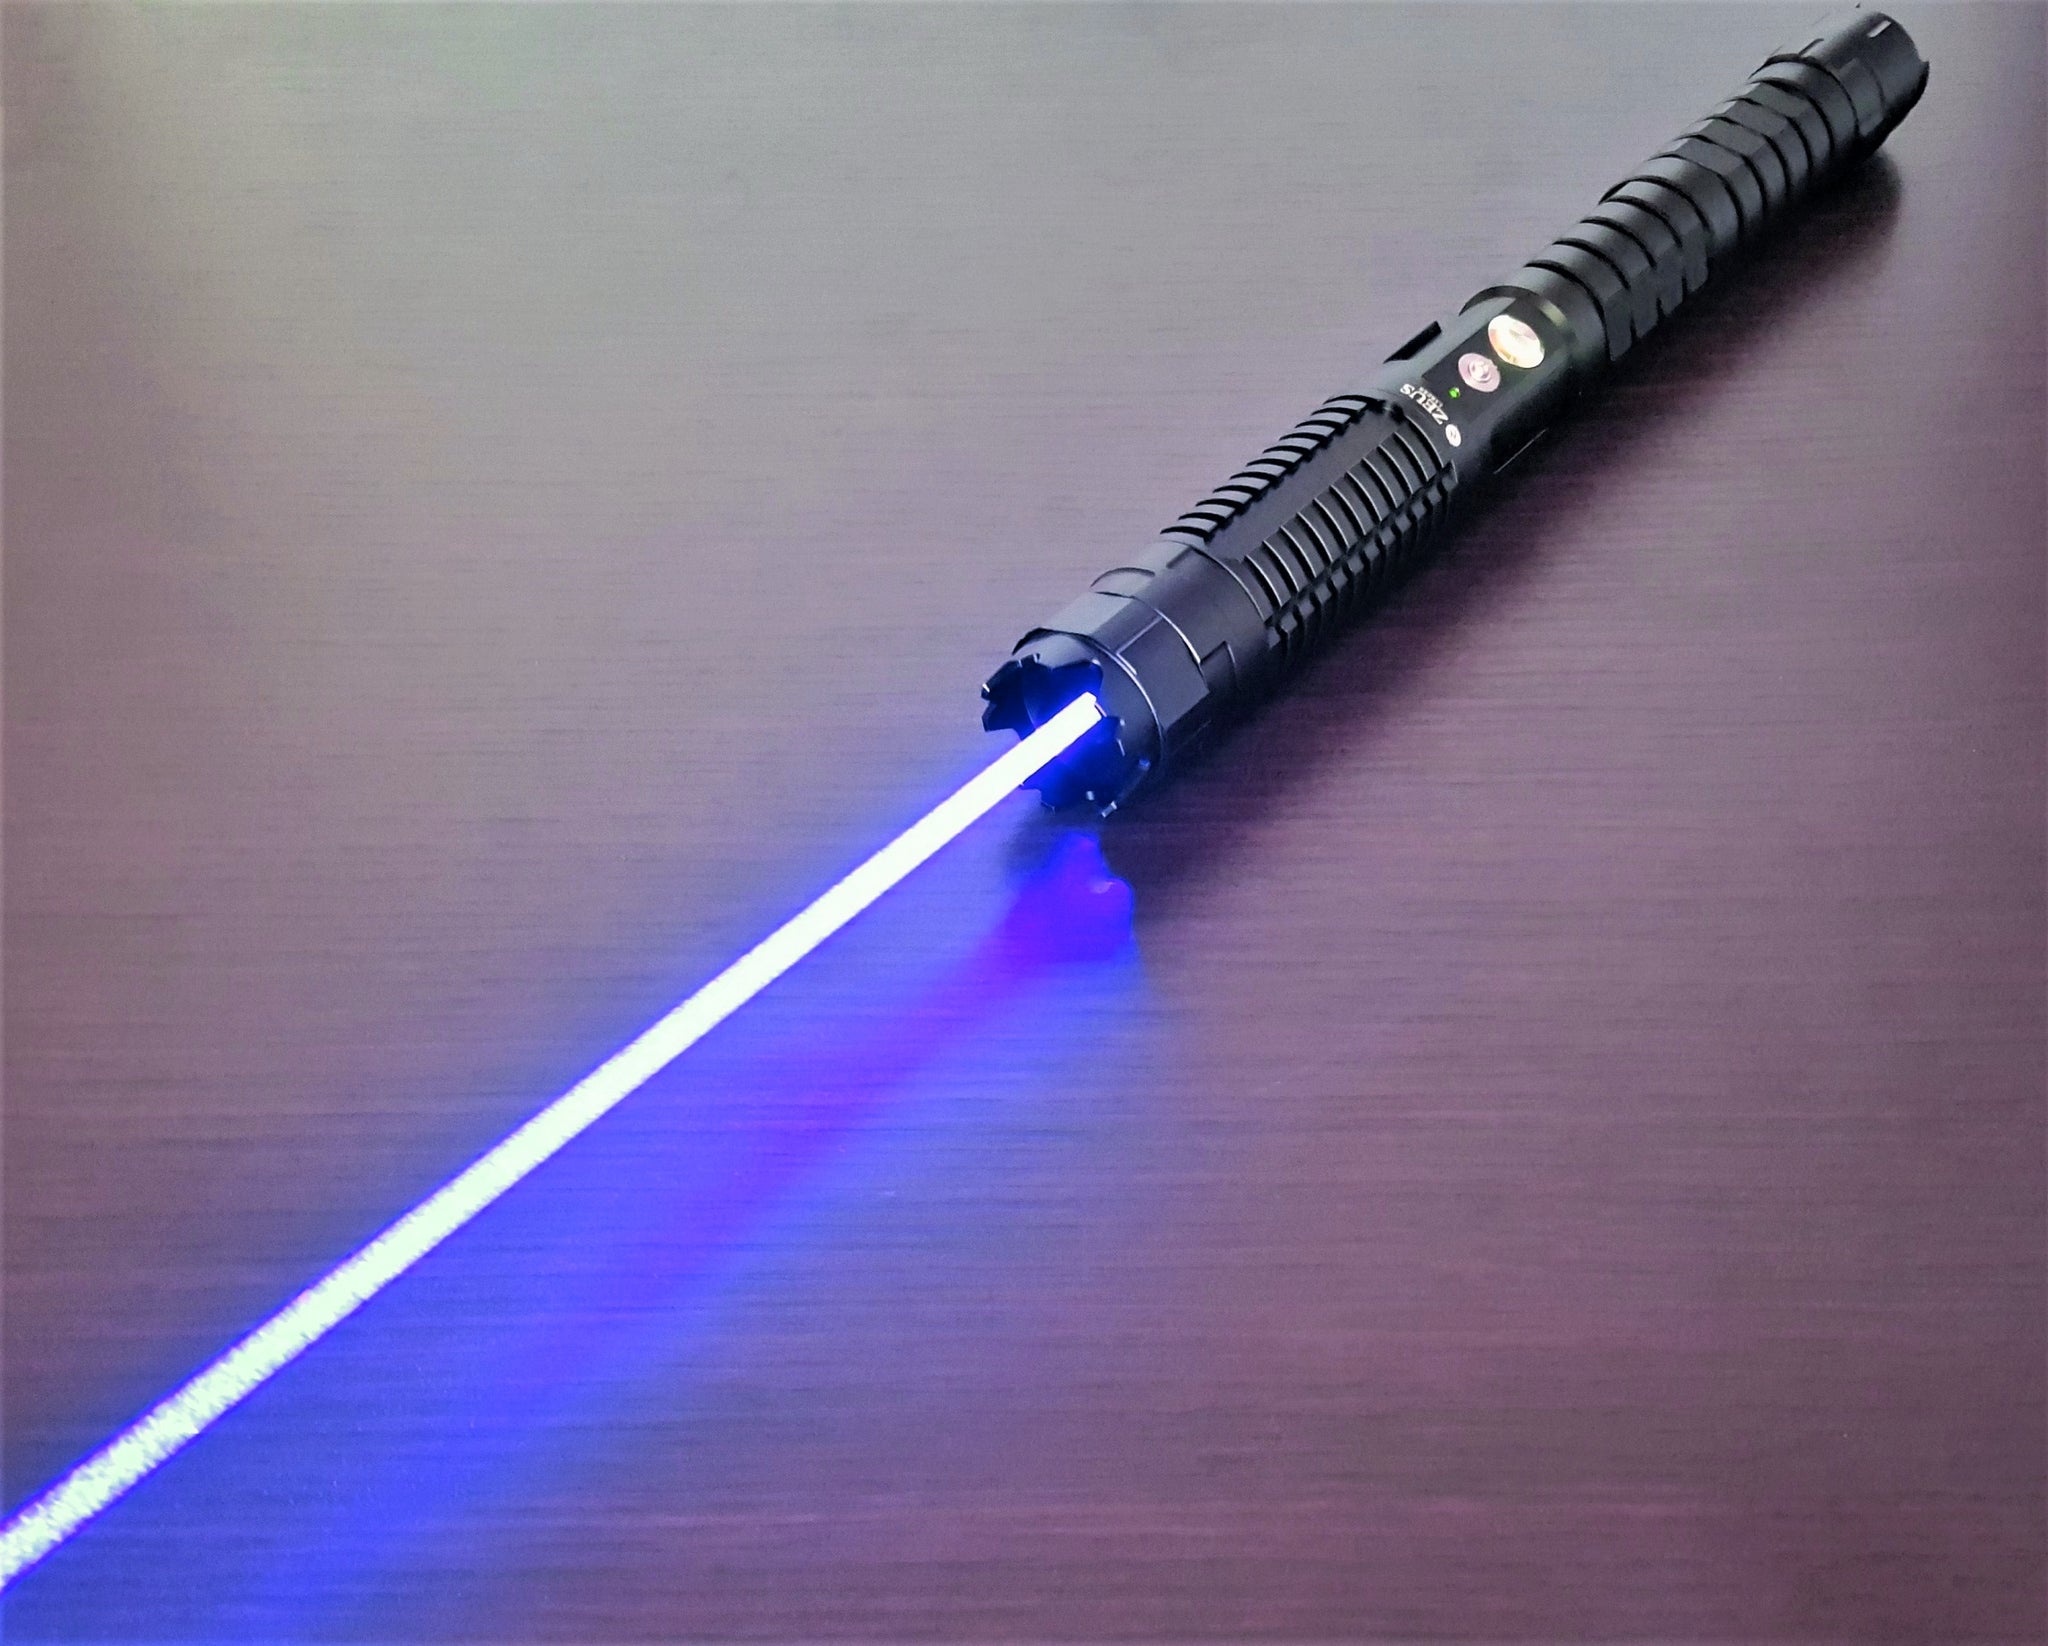 Laser Pointer Color Differences - Brightest? Burning?